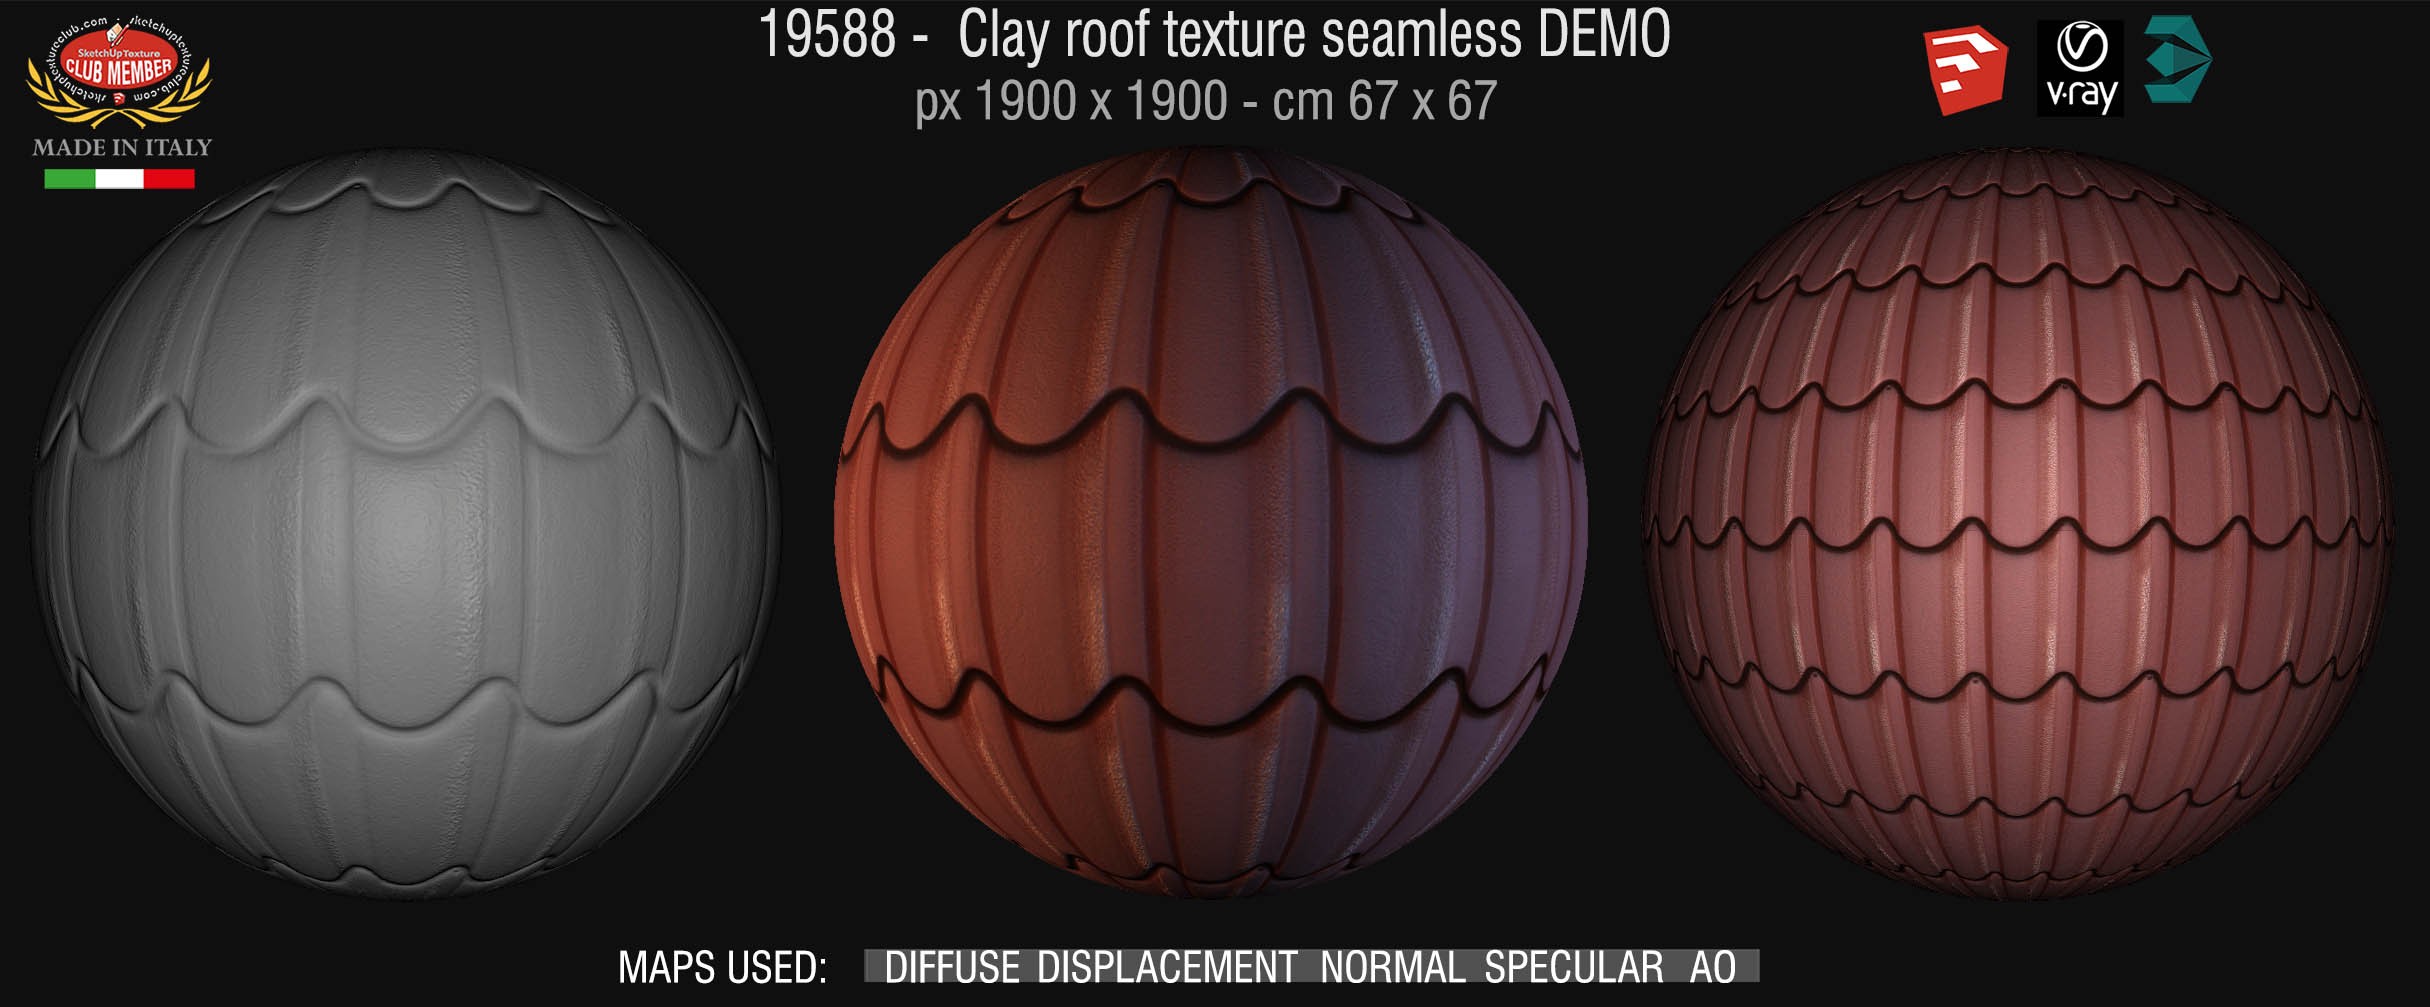 19588 Clay roof texture seamless + maps DEMO